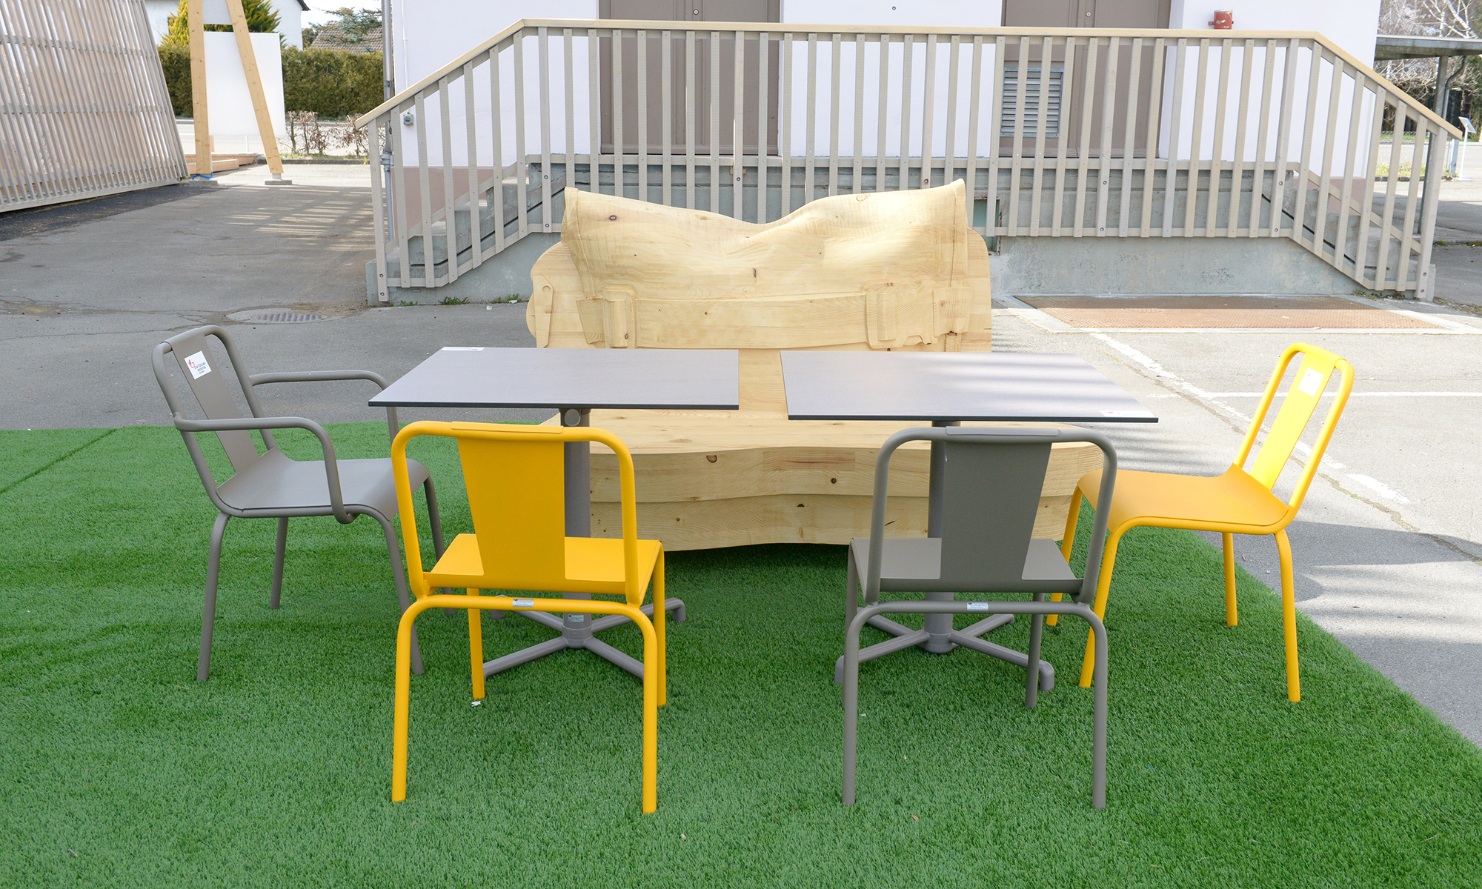 The "Freitag bench" can also easily be combined with standard seating.